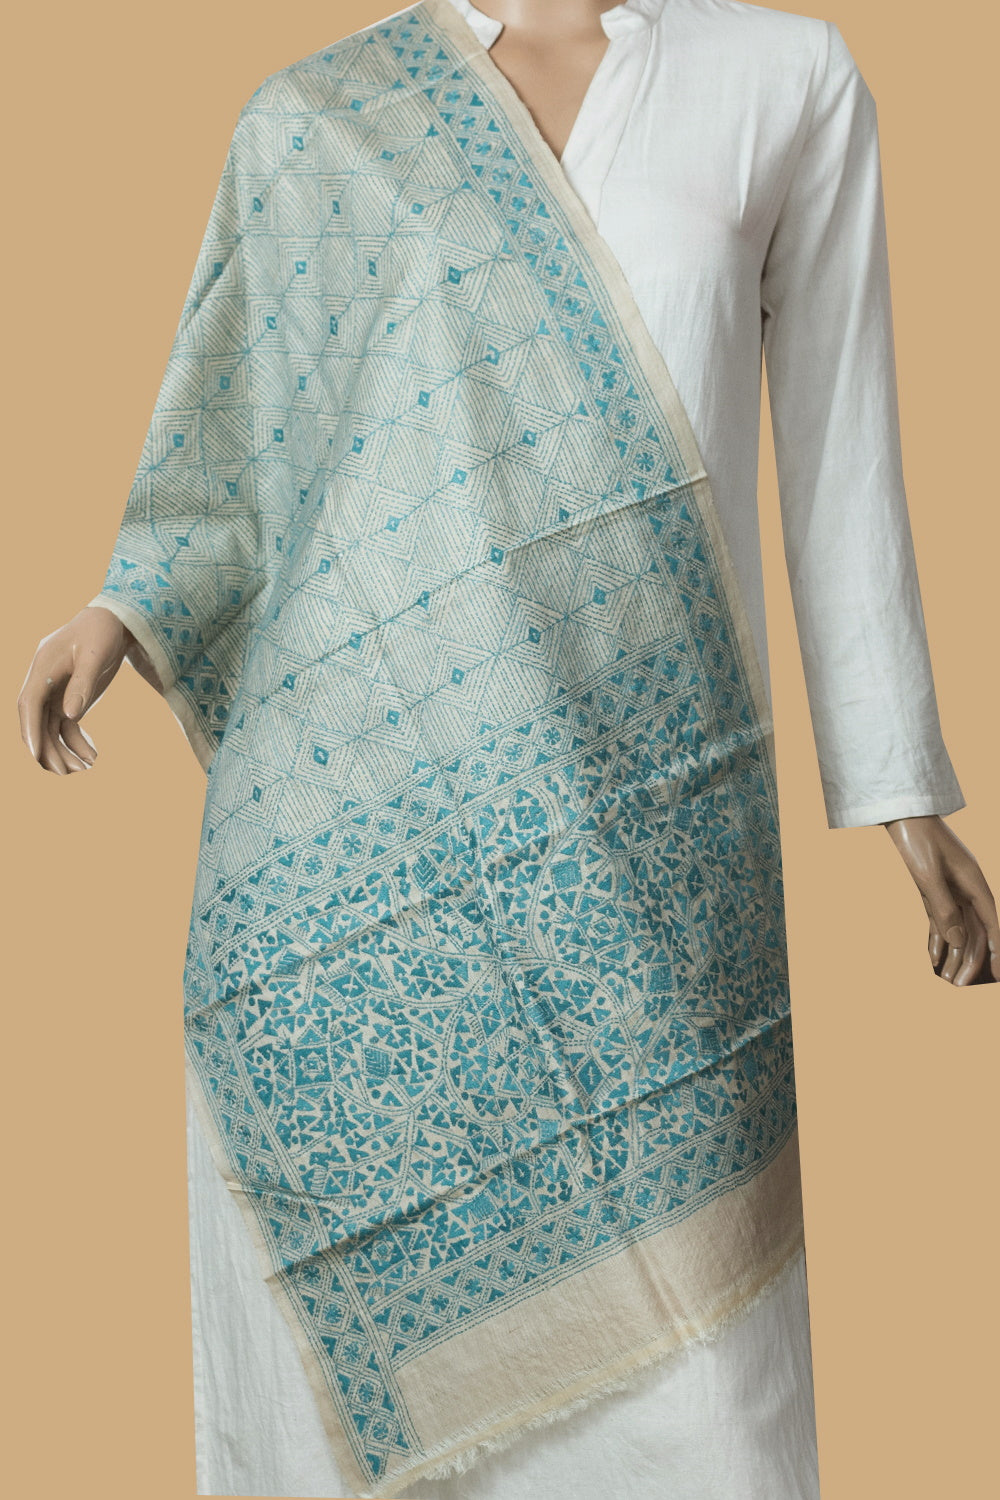 Cream with Blue Patterns Kantha Tussar Stole